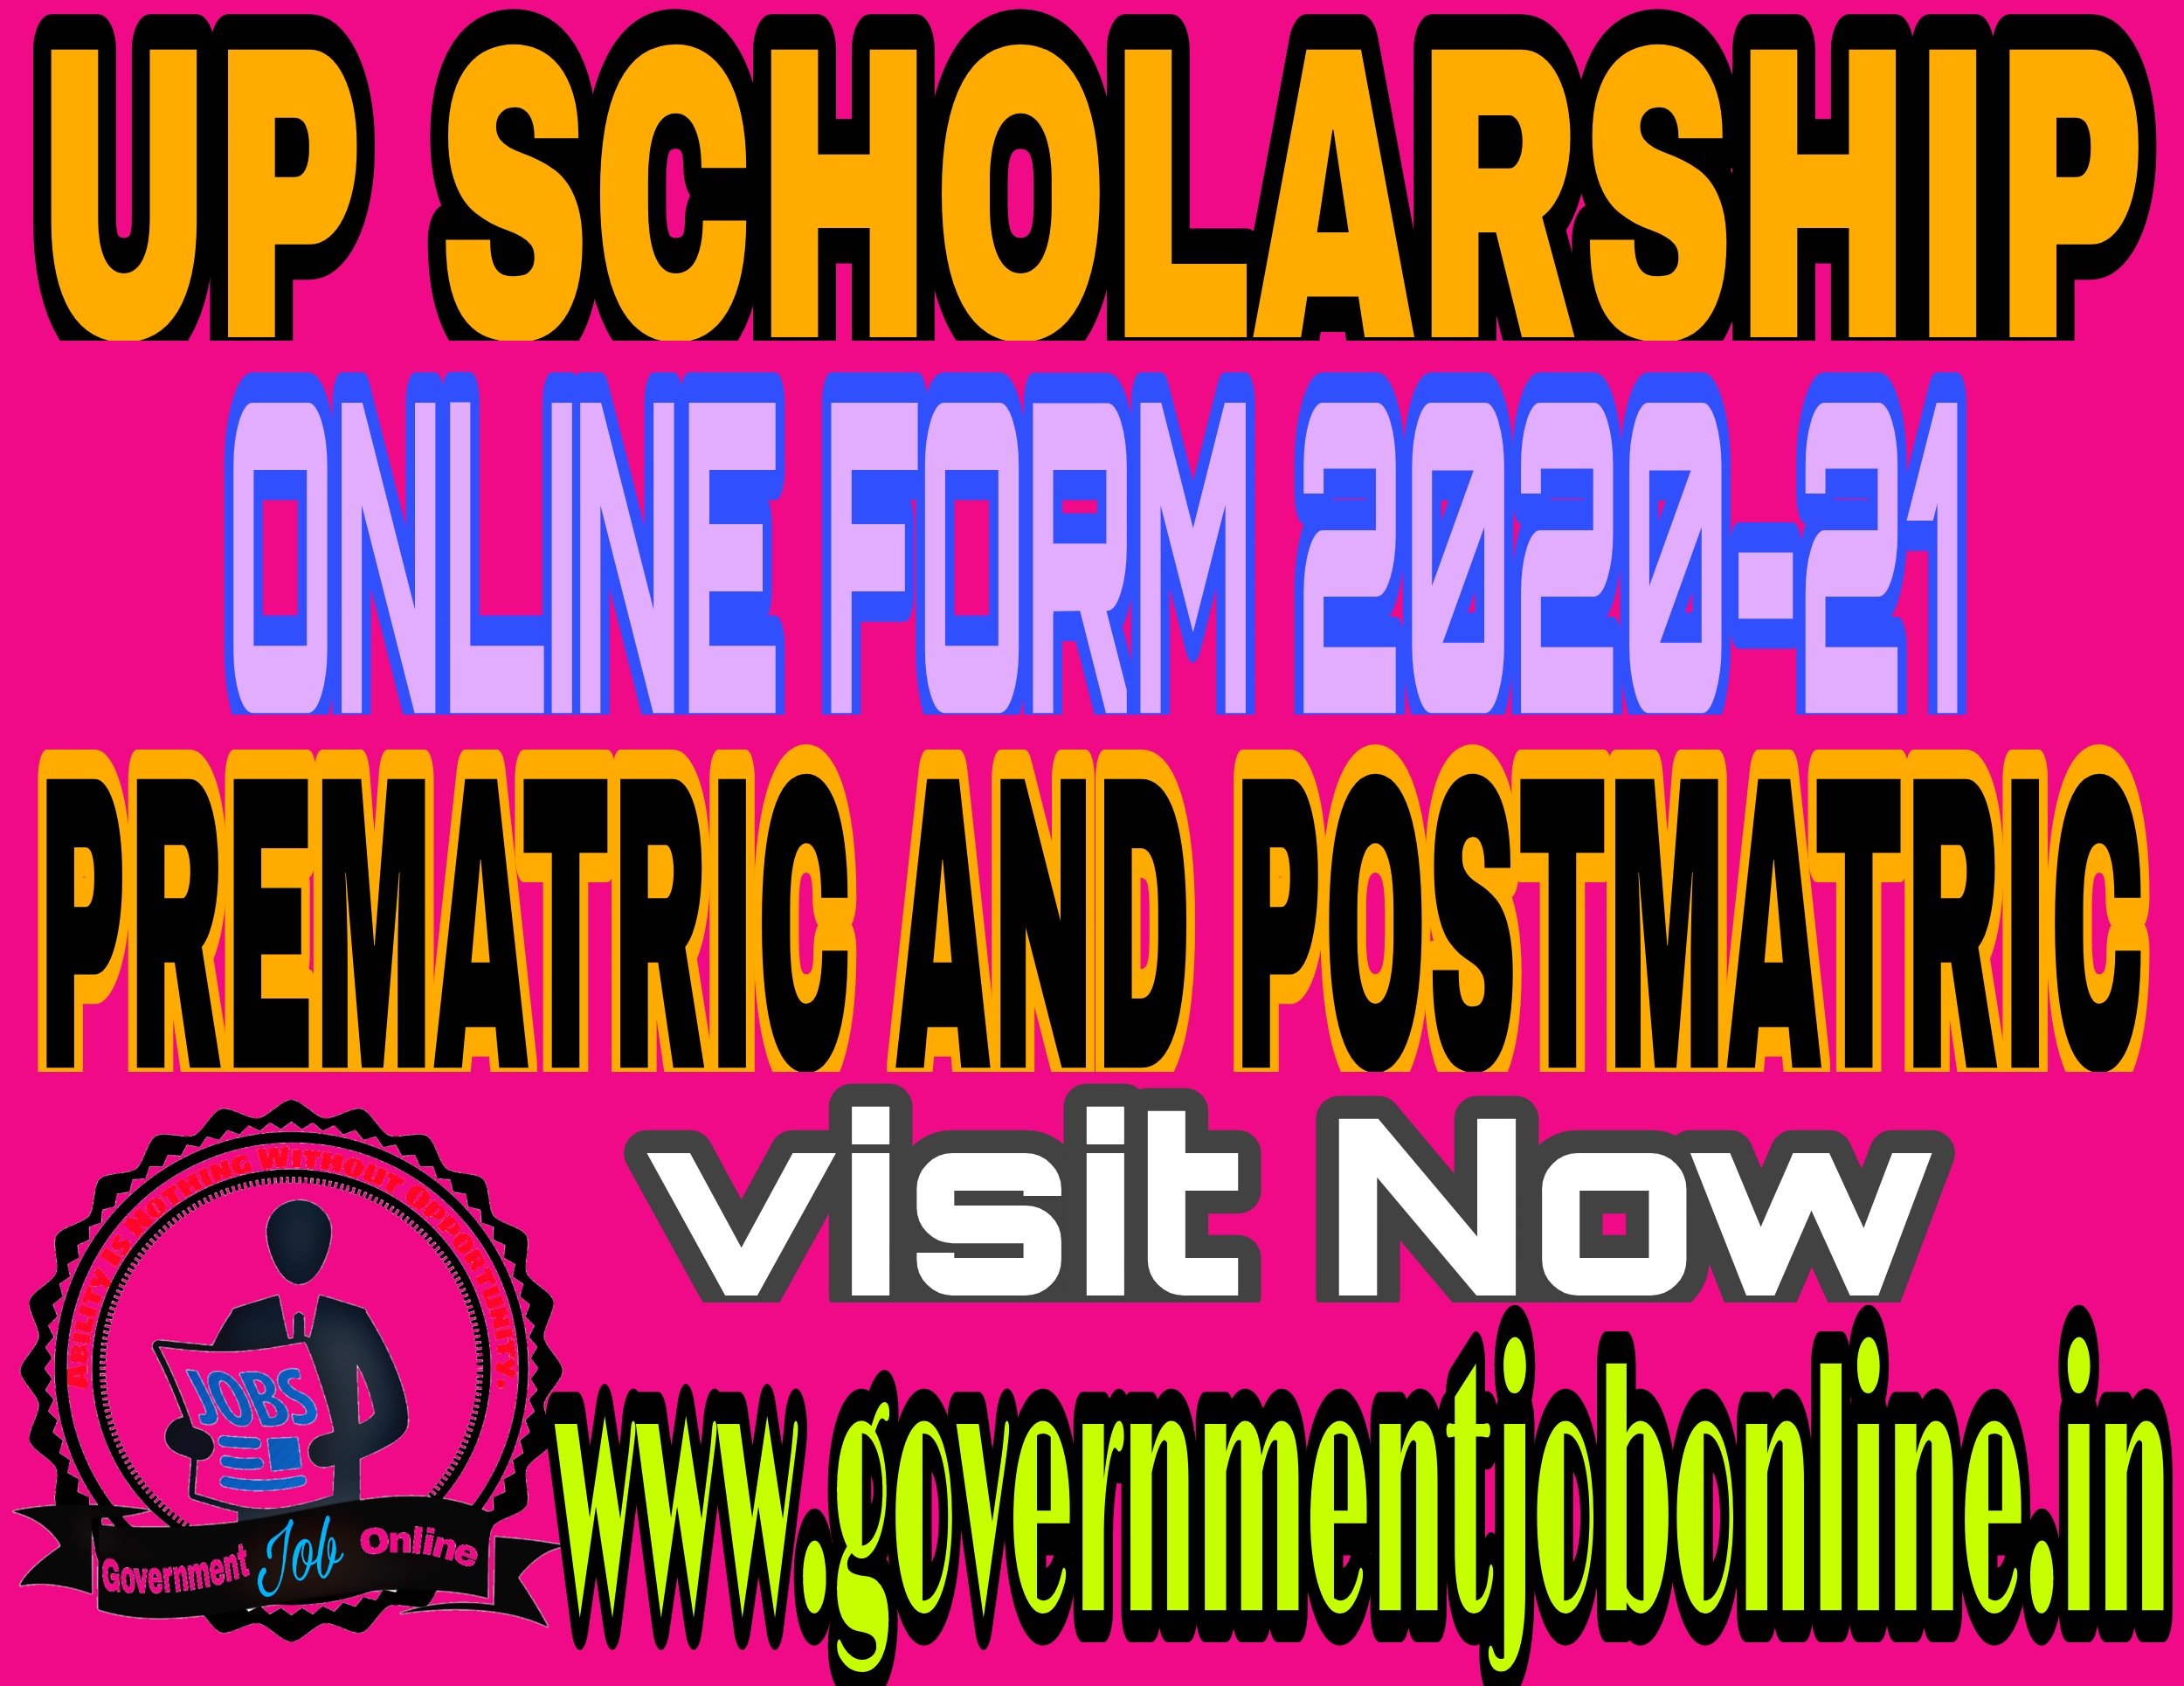 Up scholarship online form 2020-21 prematric and postmatric, UP Scholarship Online Form 2021-2022